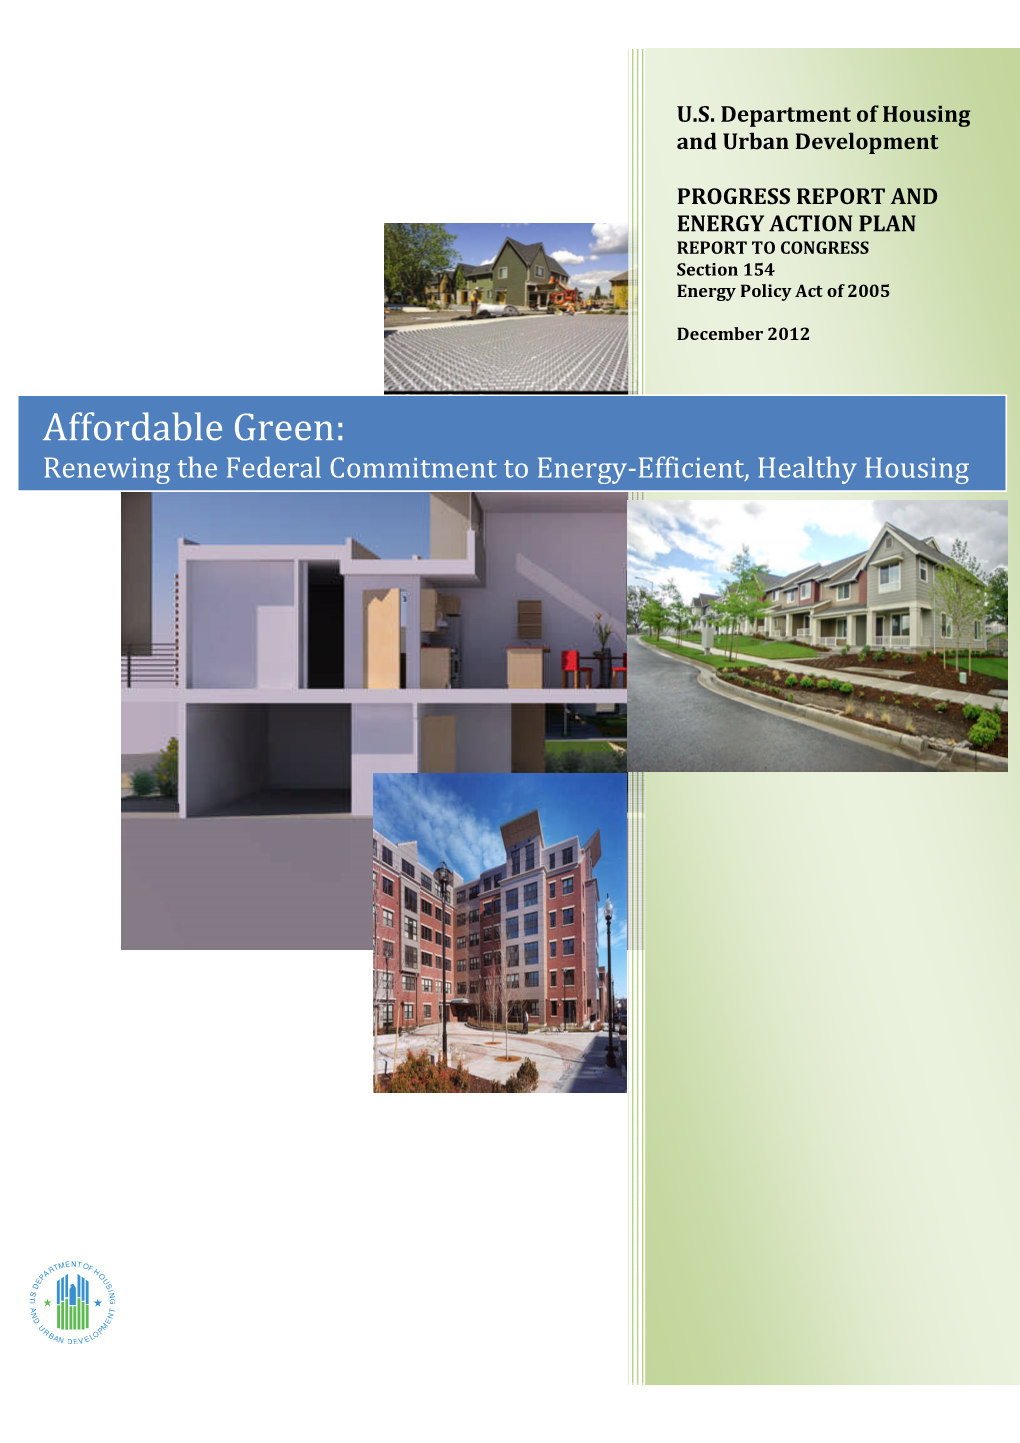 Affordable Green: Renewing the Federal Commitment to Energy-Efficient, Healthy Housing